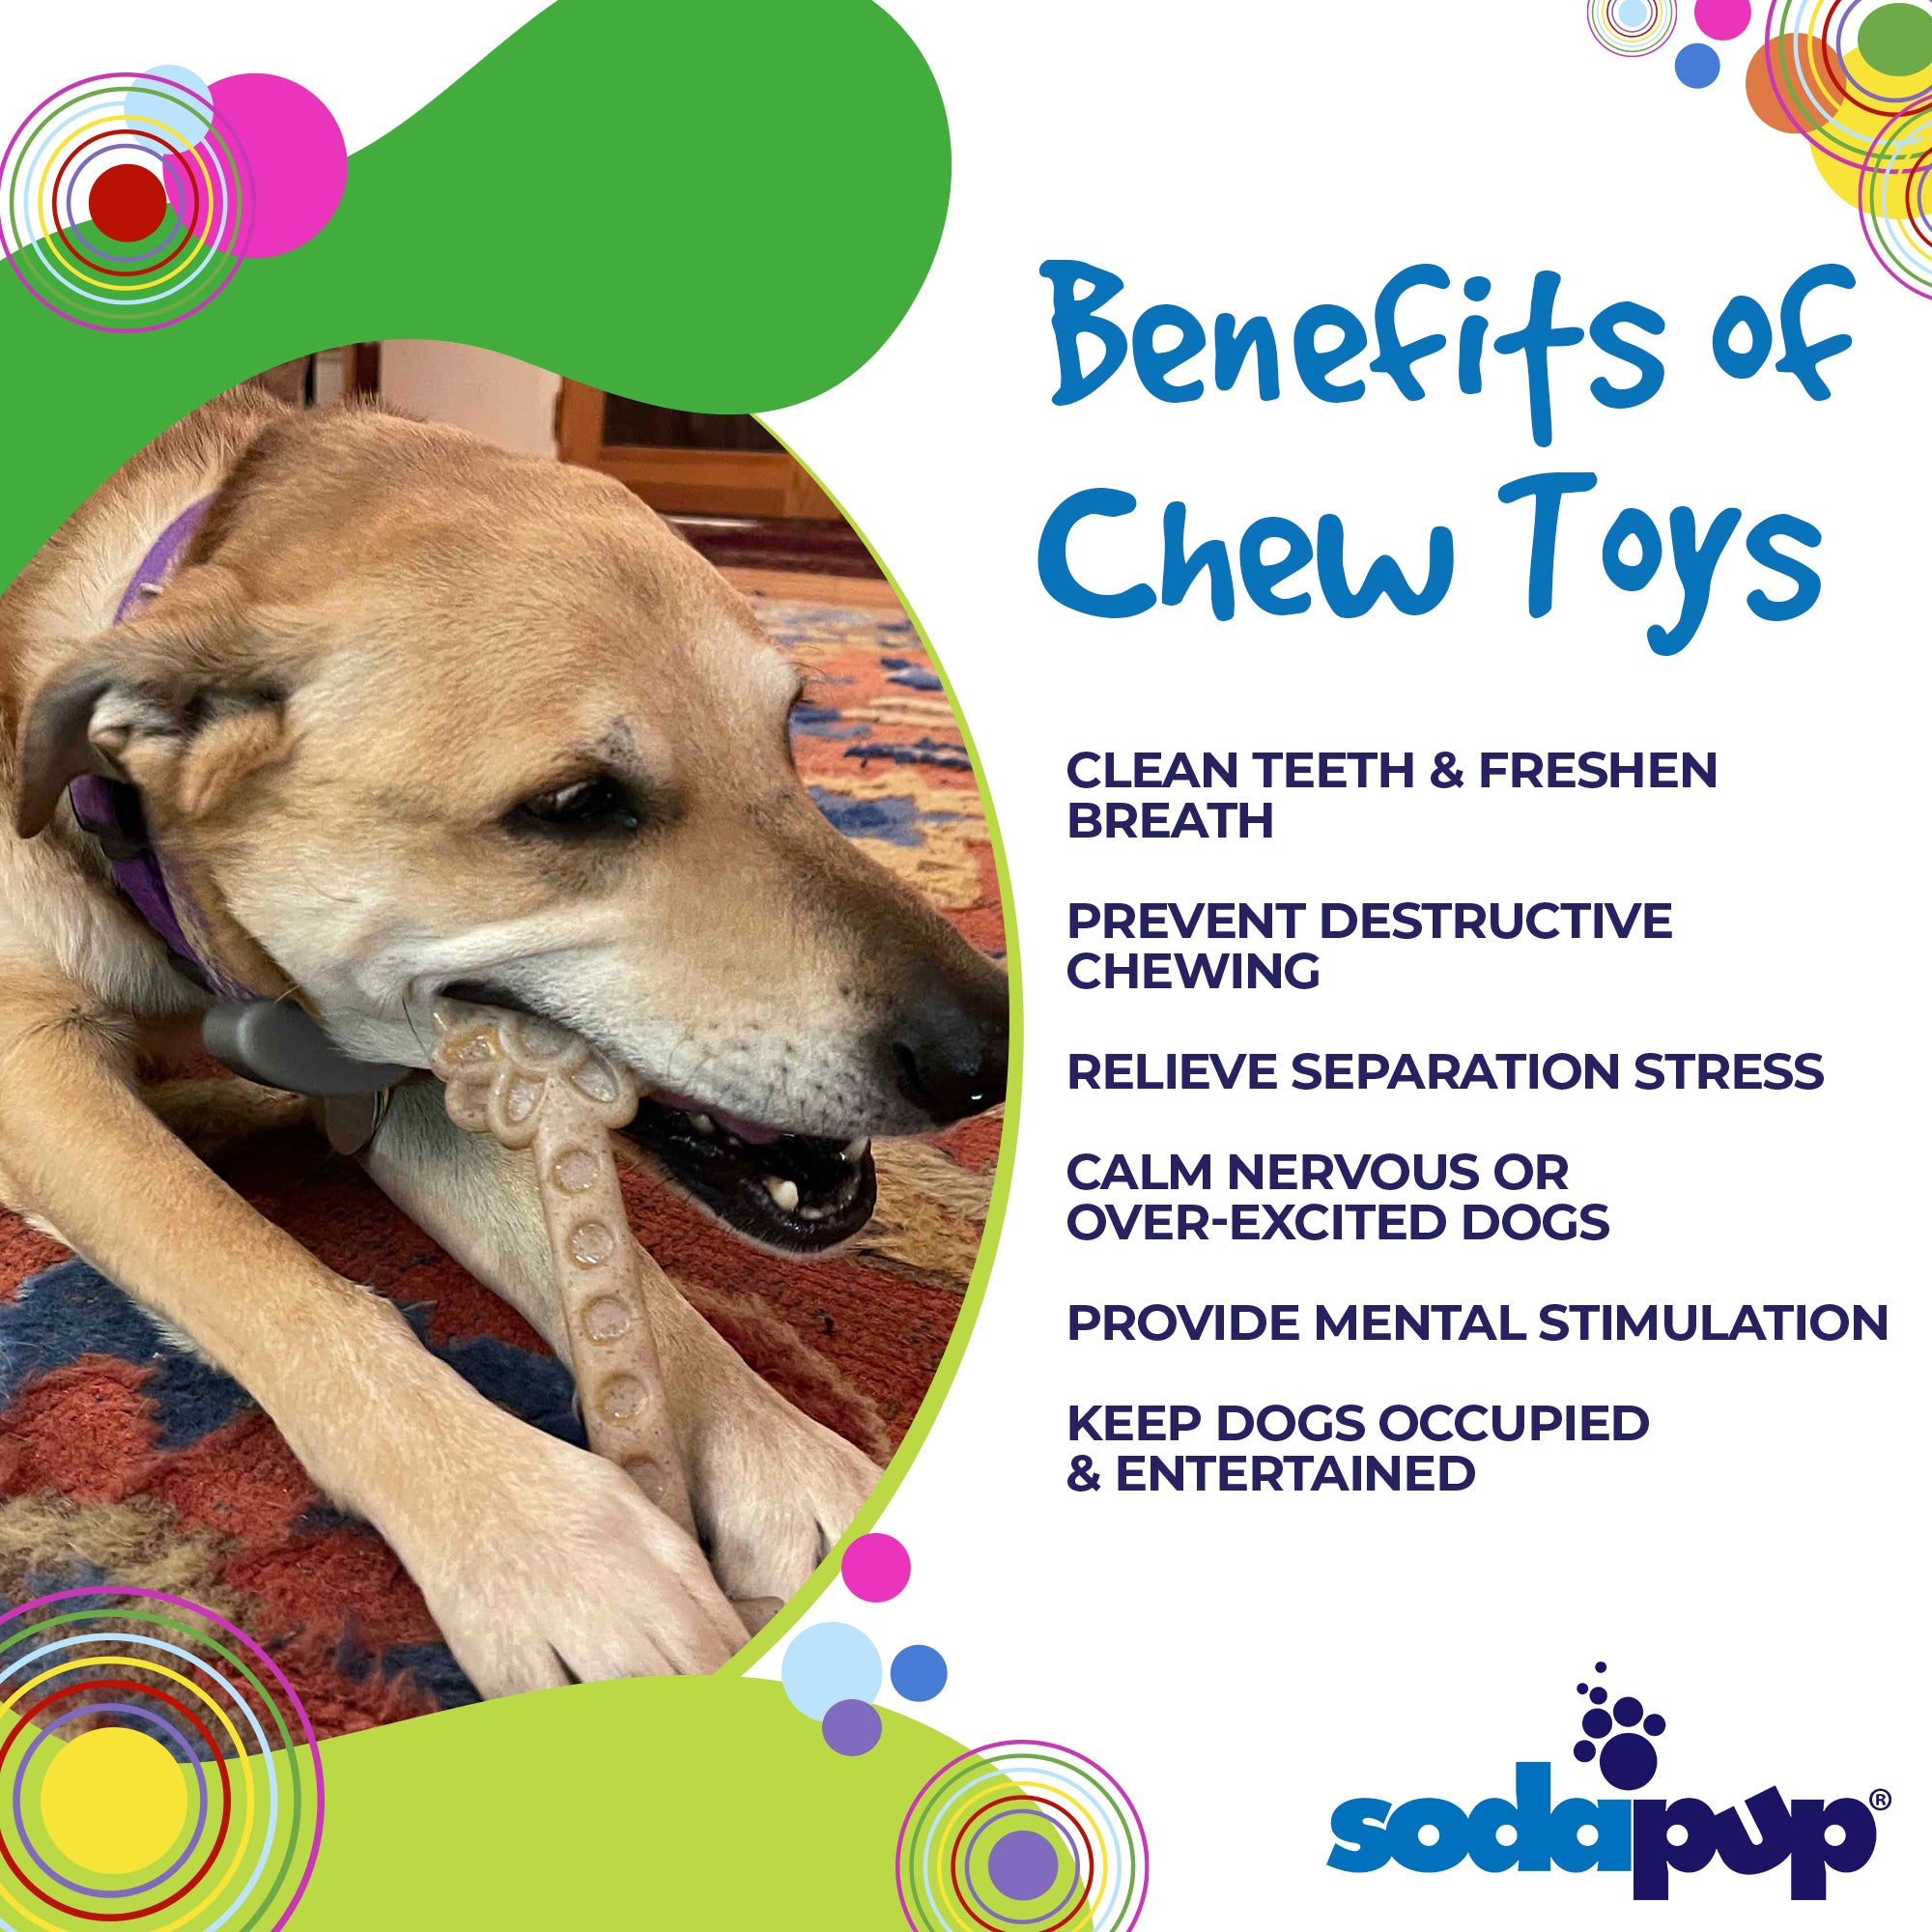 Buy Peanut Ultra Durable Nylon Dog Chew Toy today at Sodapup!